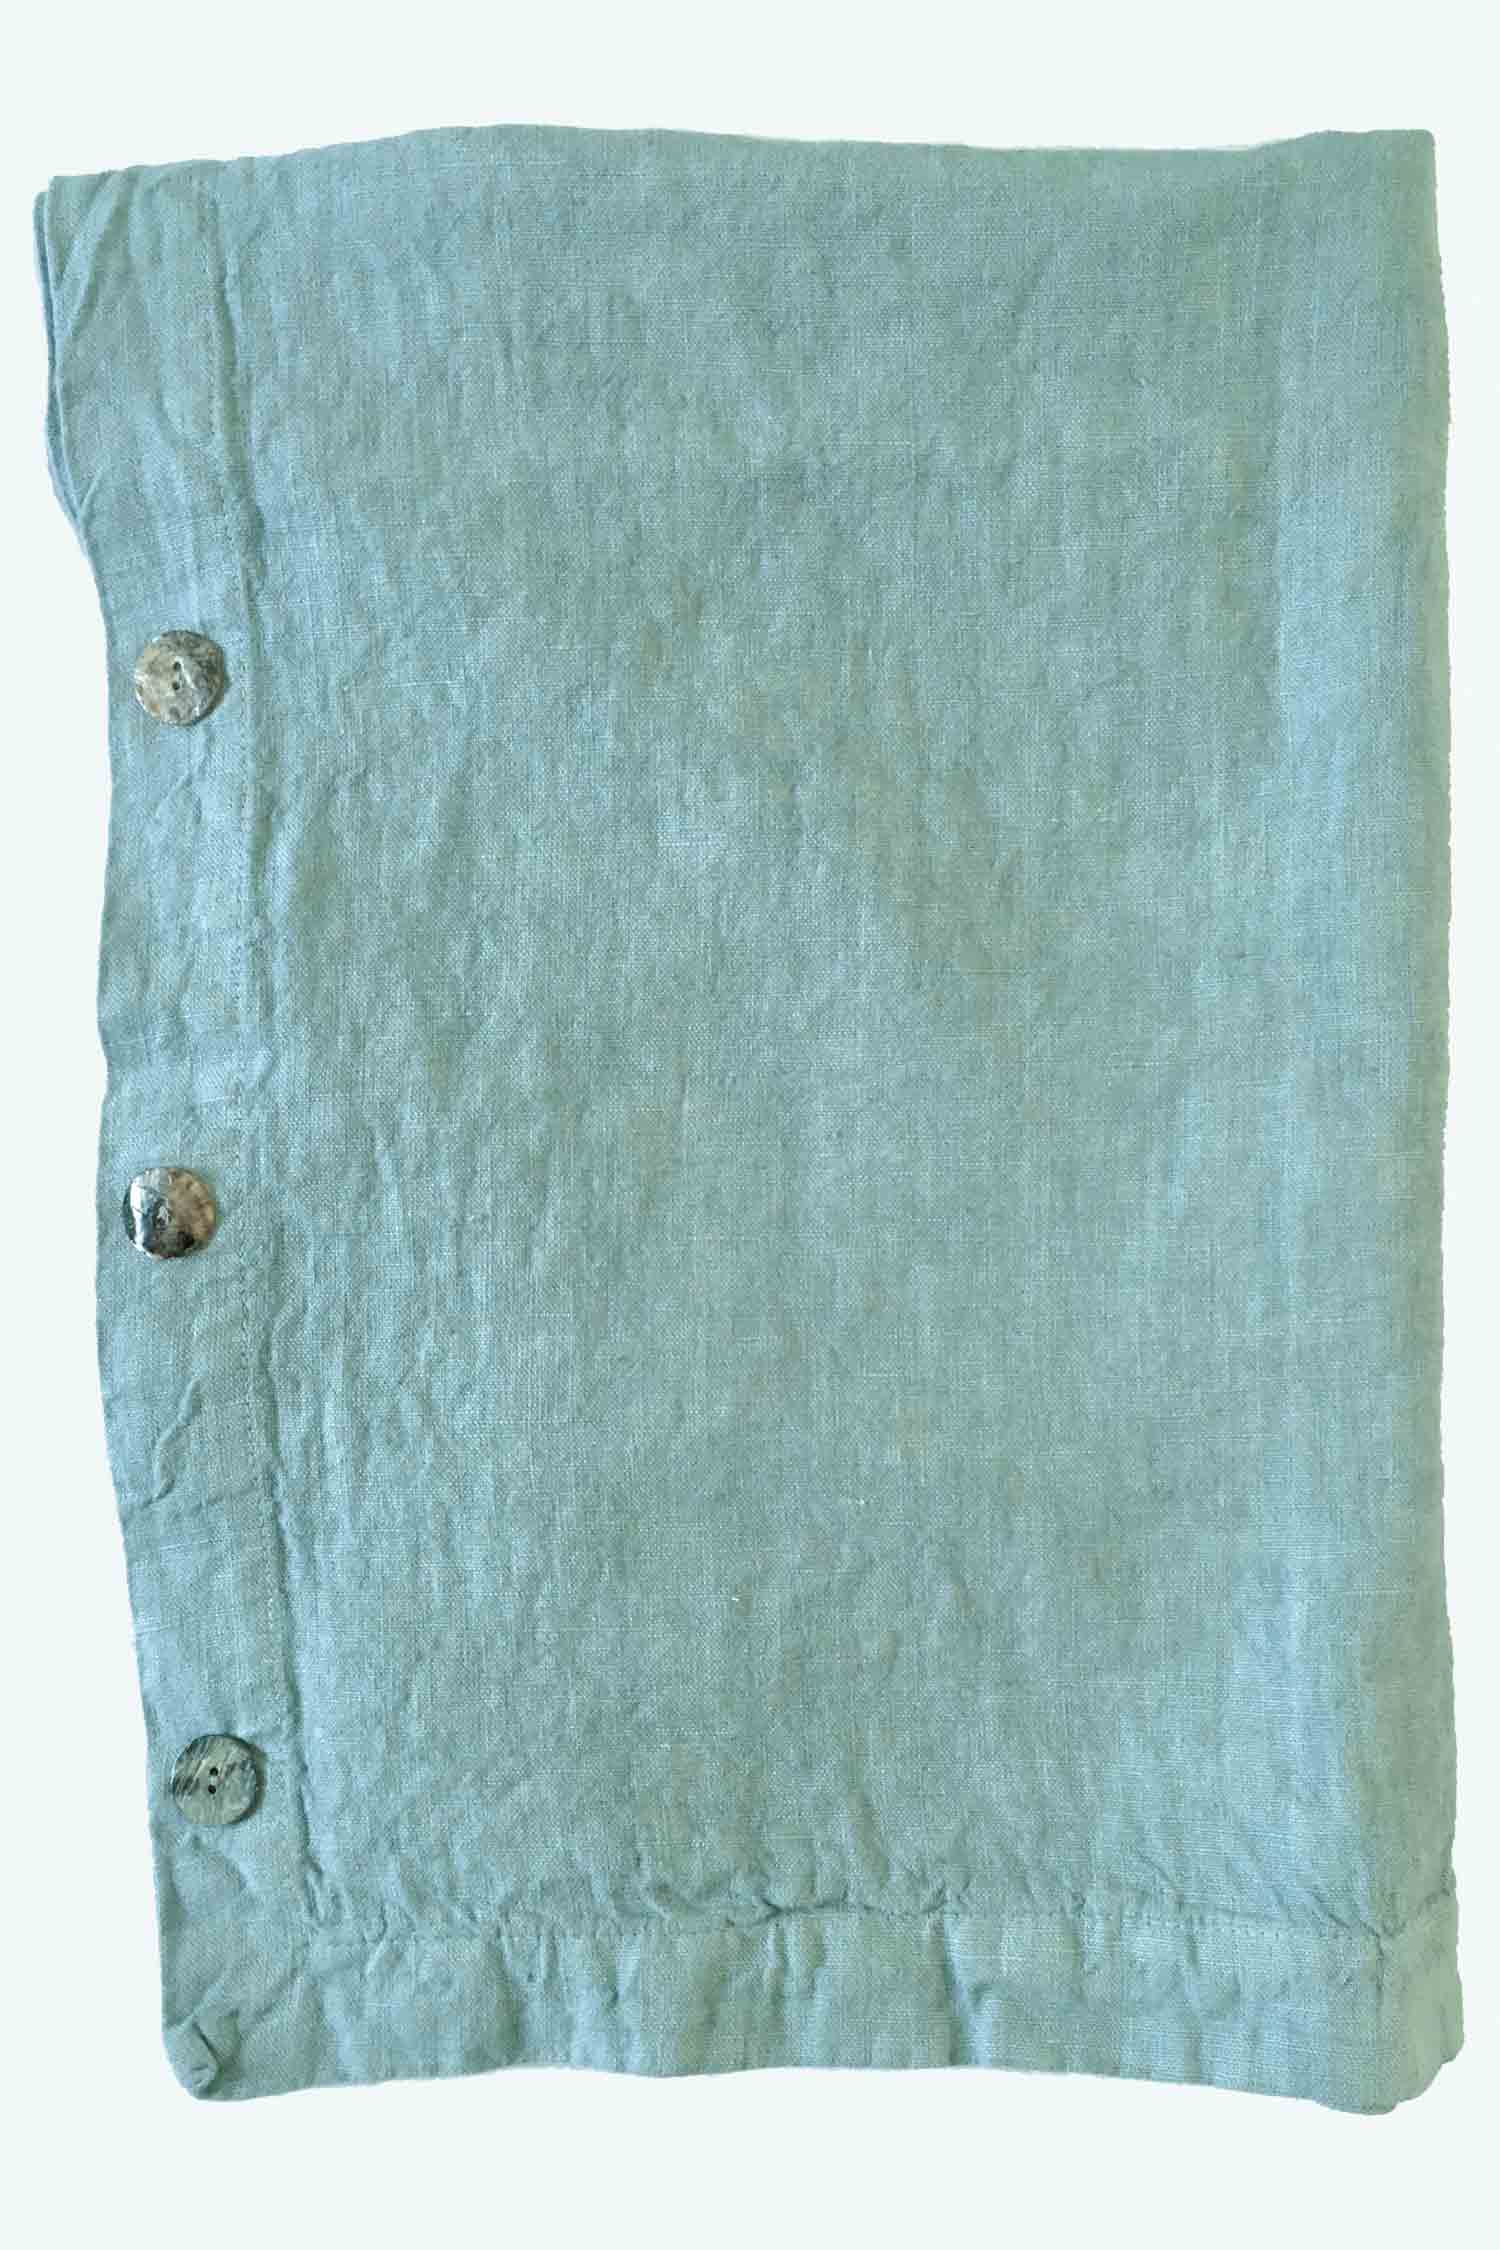 Washed Linen Pistachio Blue Table Runner